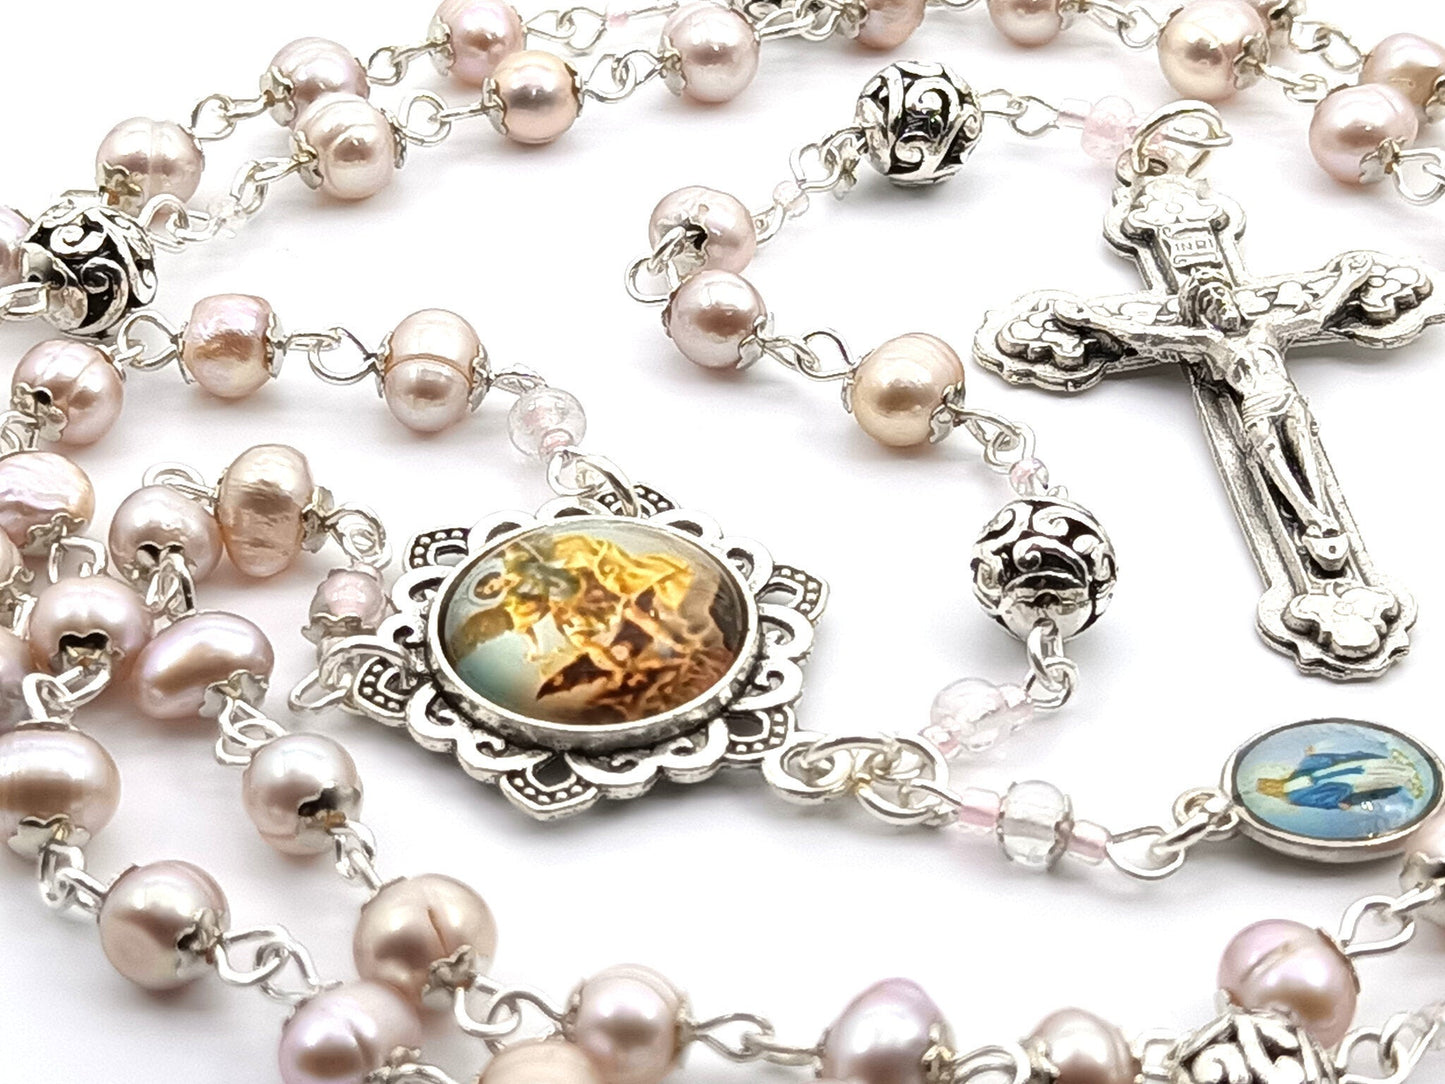 Genuine mother of pearl unique rosary beads with silver crucifix, Saint Michael picture centre medal, silver pater beads and bead caps.